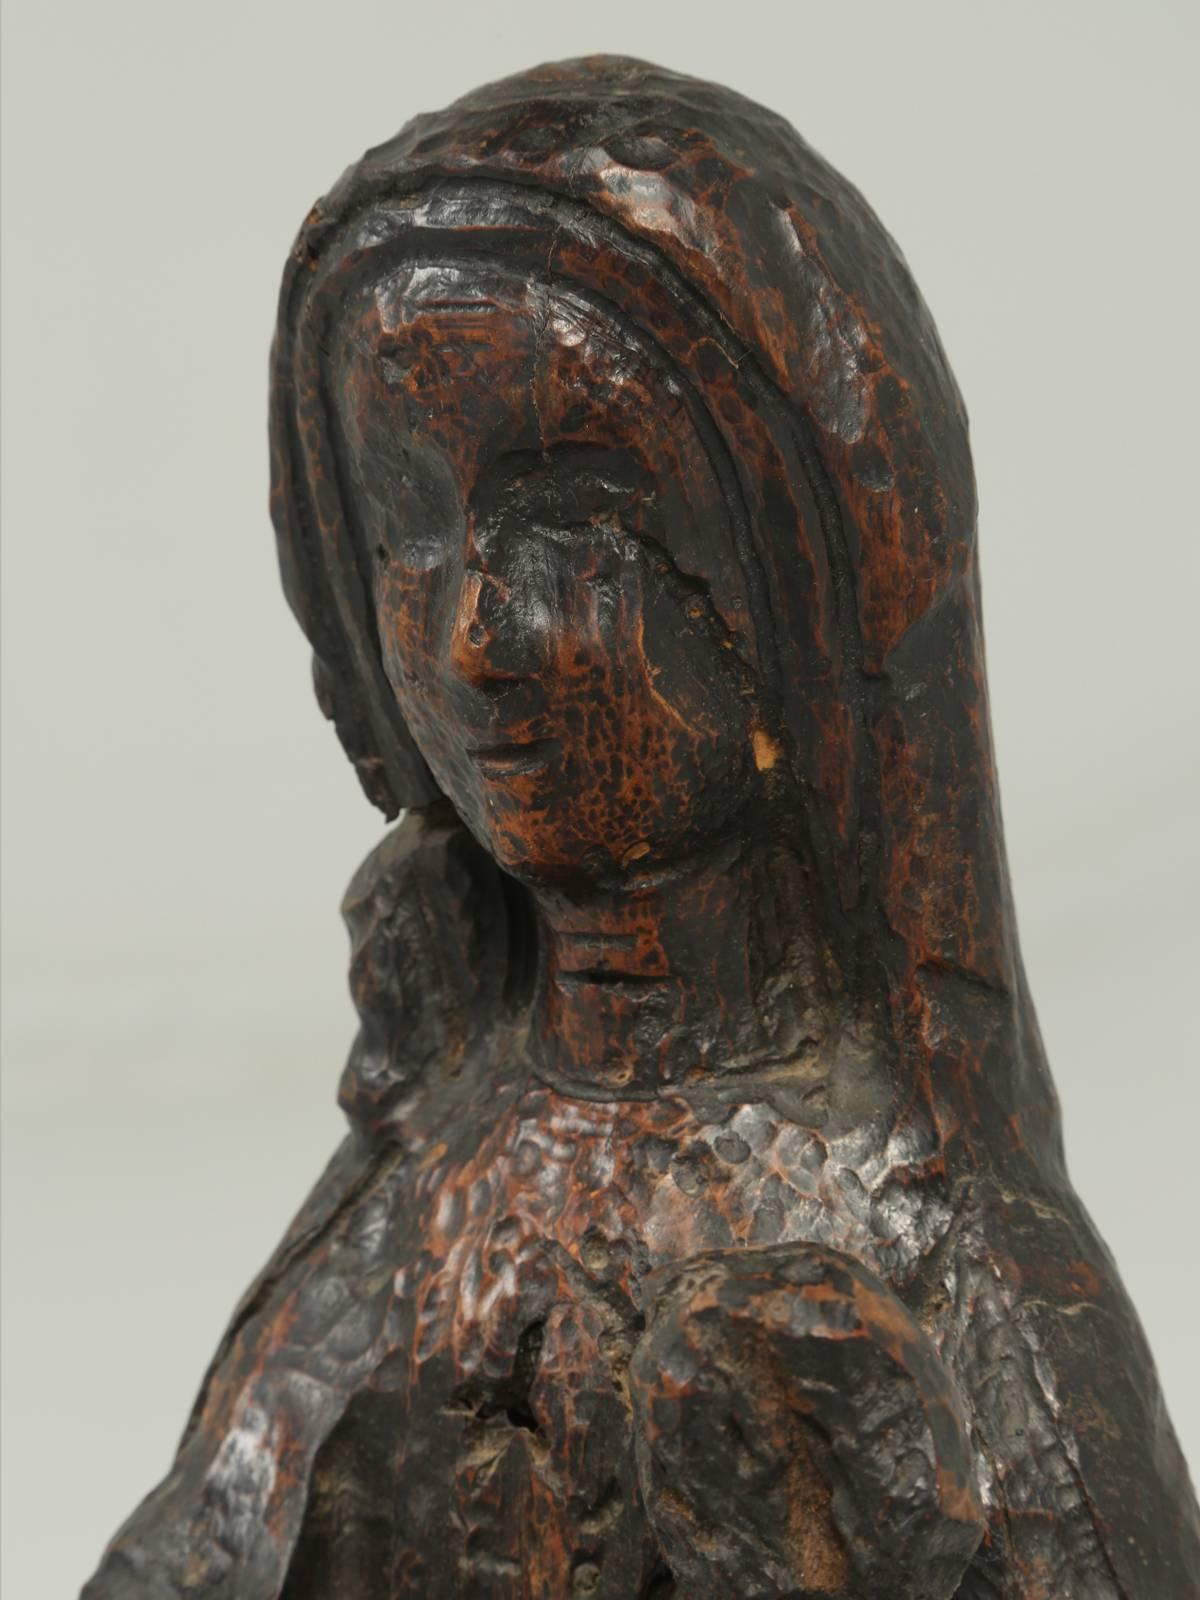 Rustic wood carving of a woman holding a child. The carving is from Spain and we were told it dates from the late 1600s and it looks that hold in real life. The woman appears to be missing part of her arm and if you were so inclined, we could